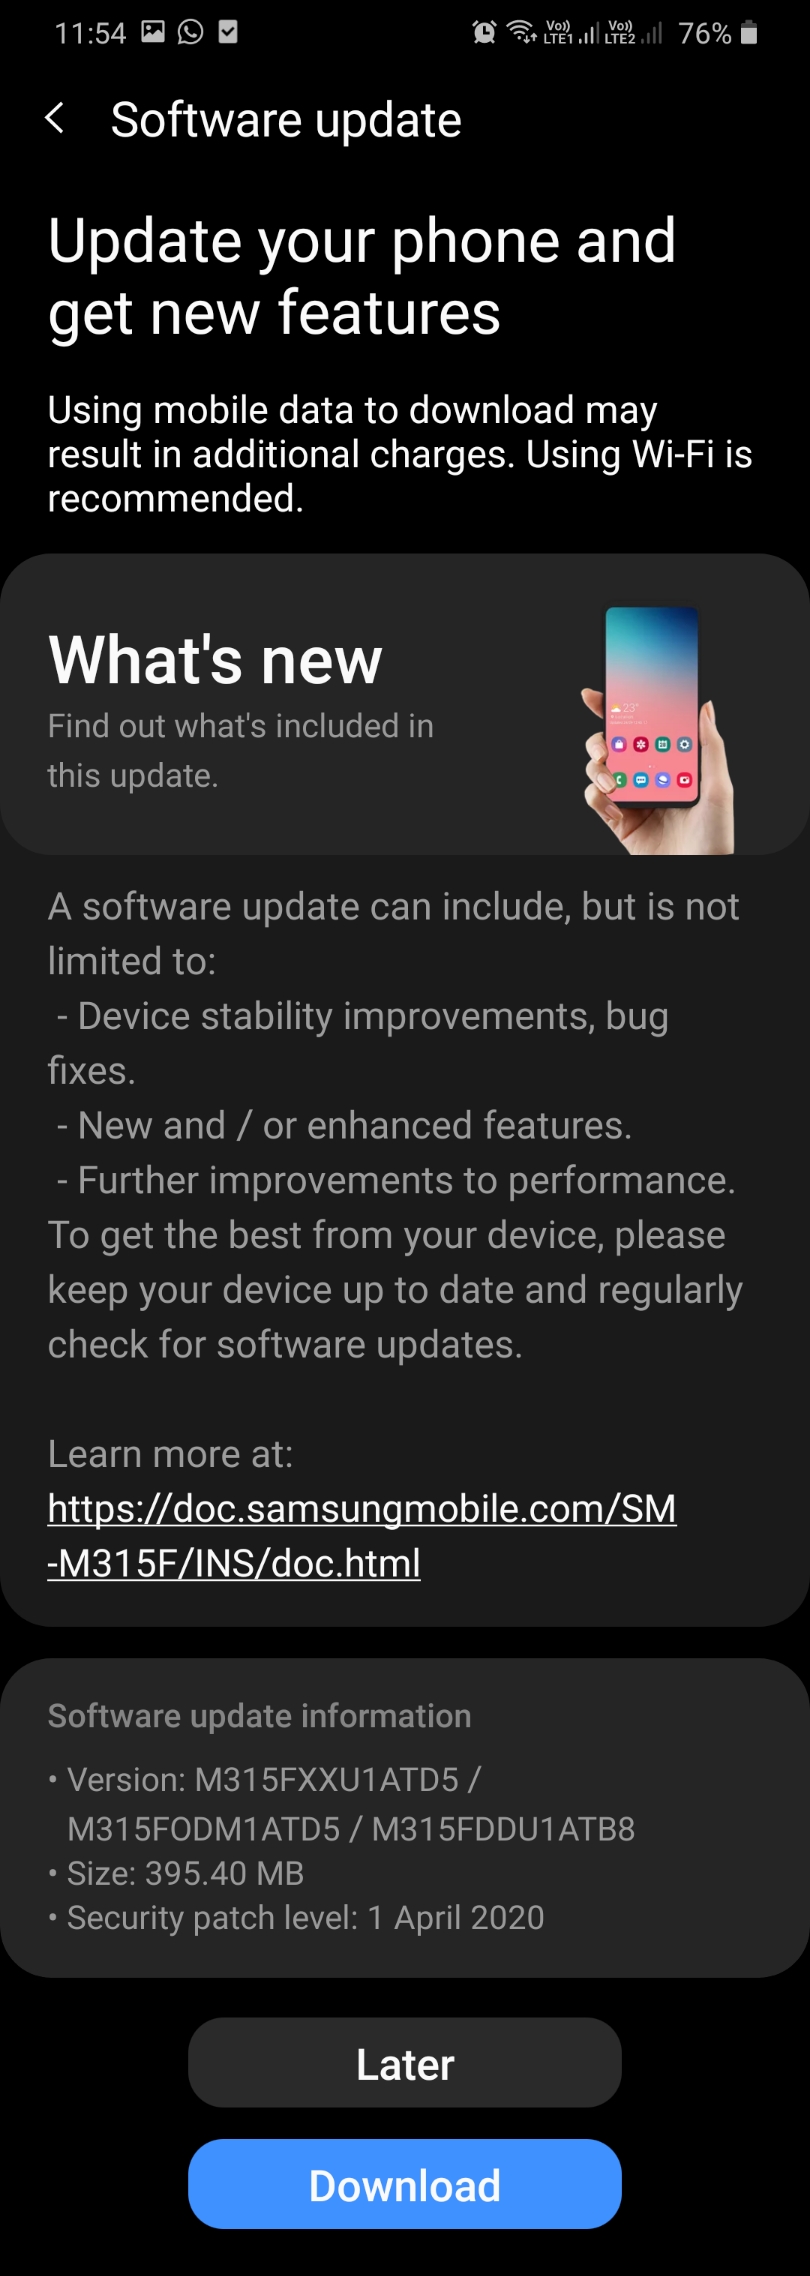 https://www.gizmochina.com/wp-content/uploads/2020/05/Galaxy-M31-April-2020-Security-Patch-Re-release.jpg